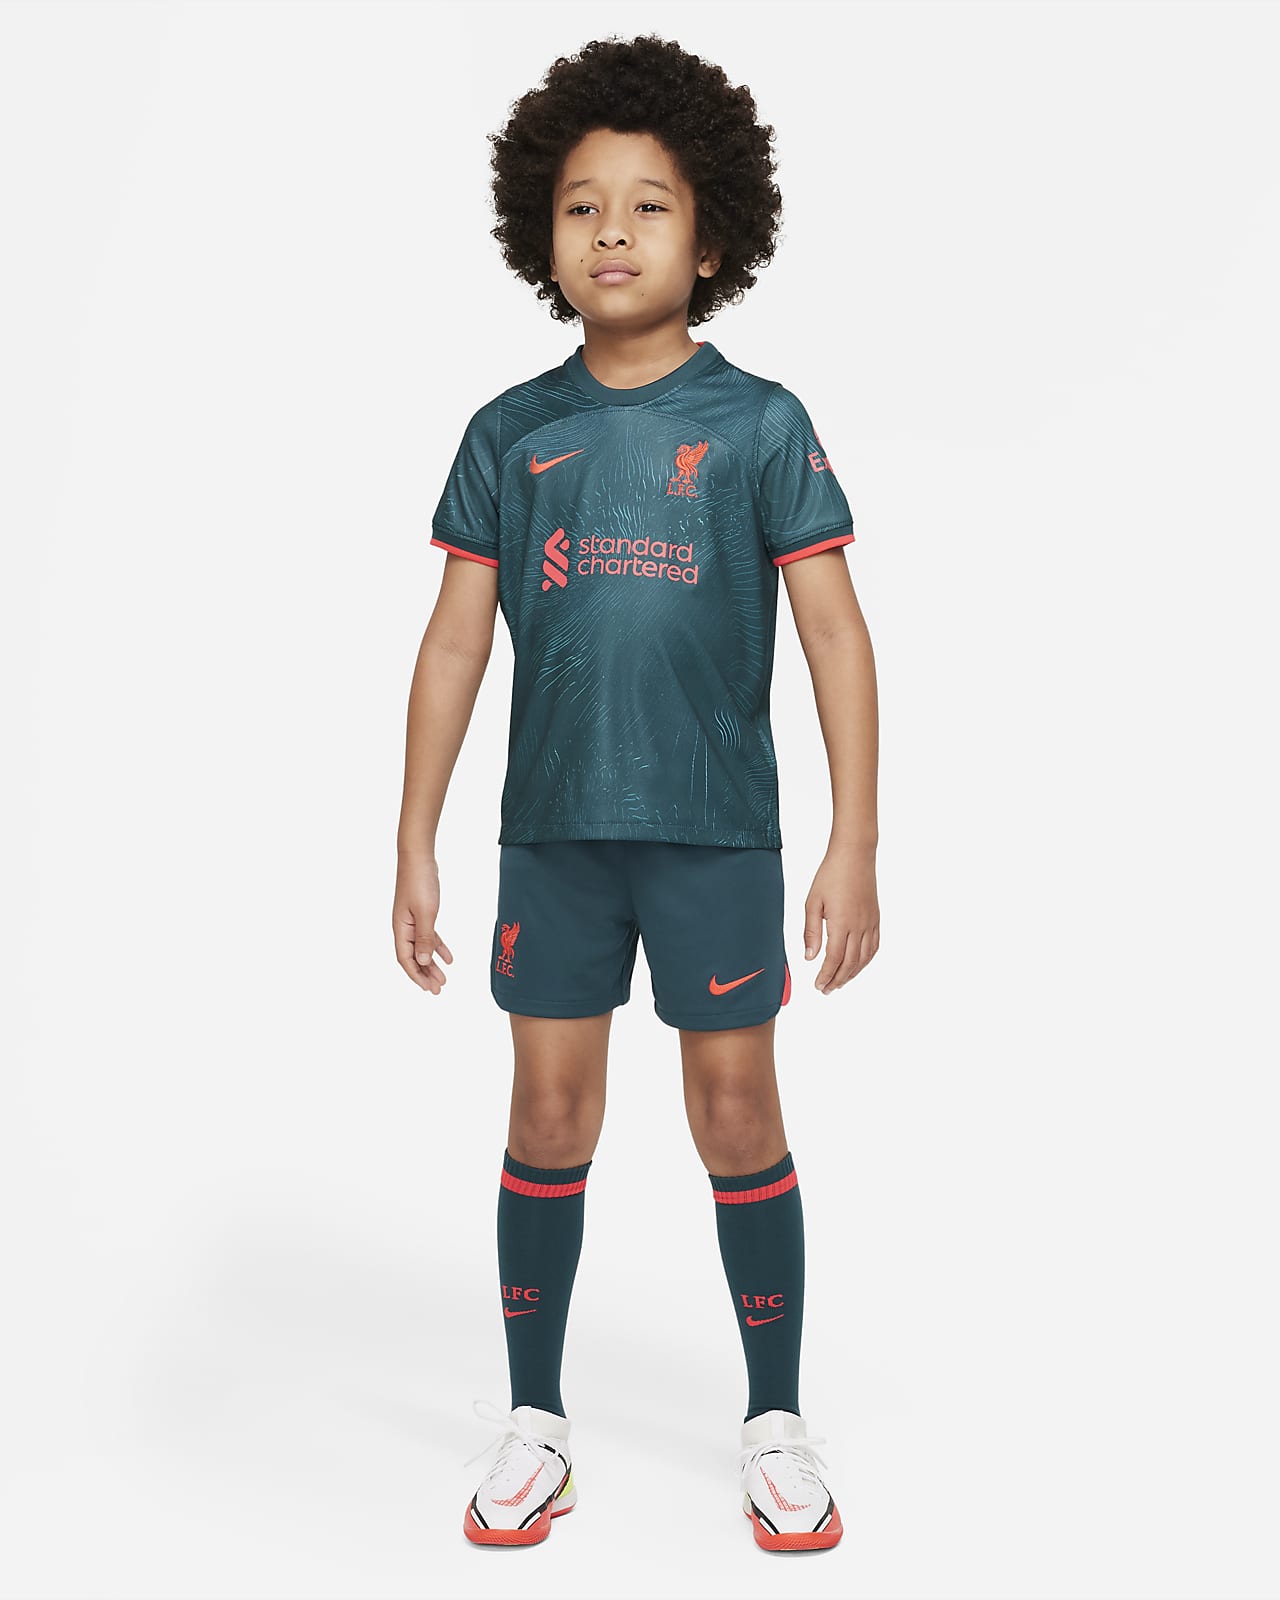 Liverpool F.C. 2022/23 Third Younger Kids' Nike Football Kit